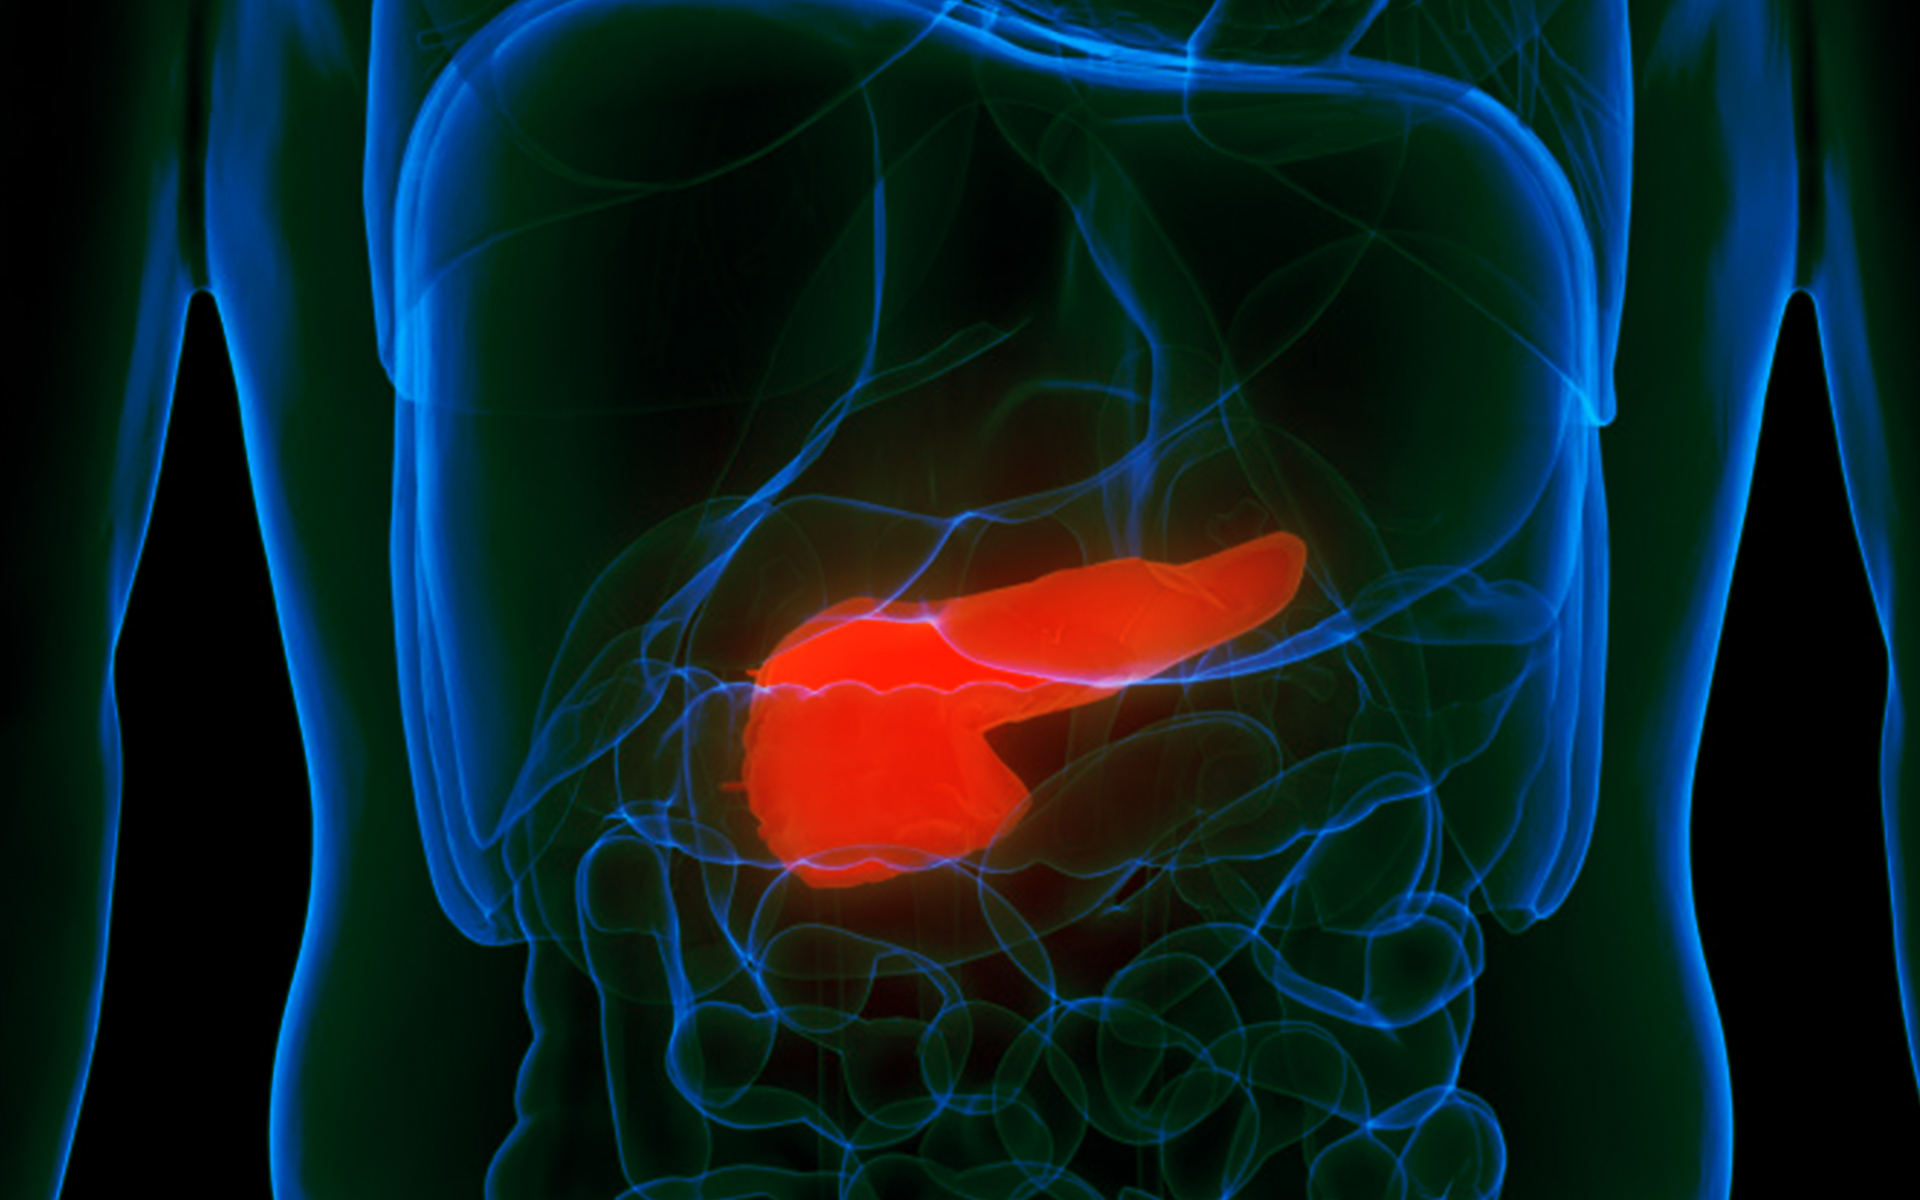 Dxcover’s Scientists Publish on Early-Stage Detection of Pancreatic Cancer